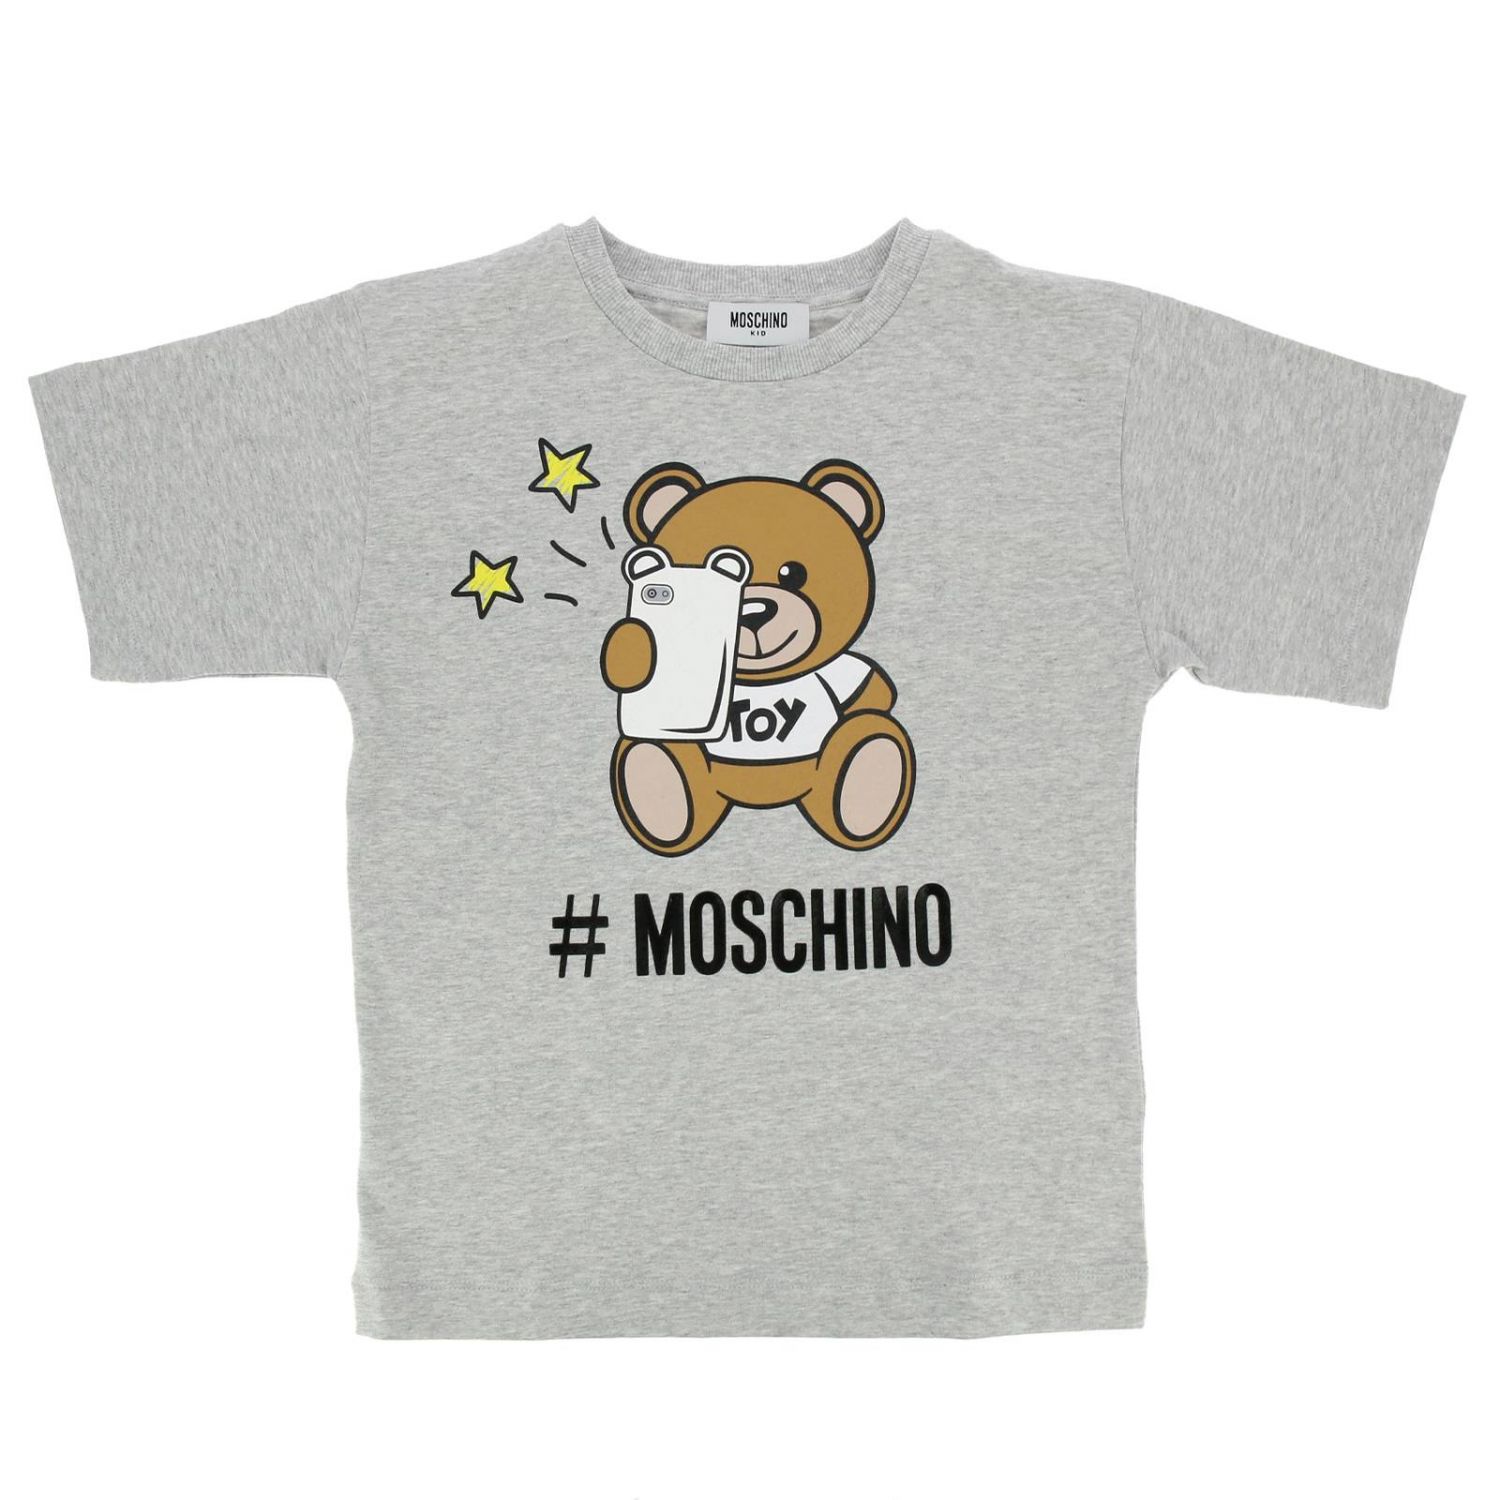 Moschino Kid Outlet: t-shirt for boys - Grey | Moschino Kid t-shirt ...